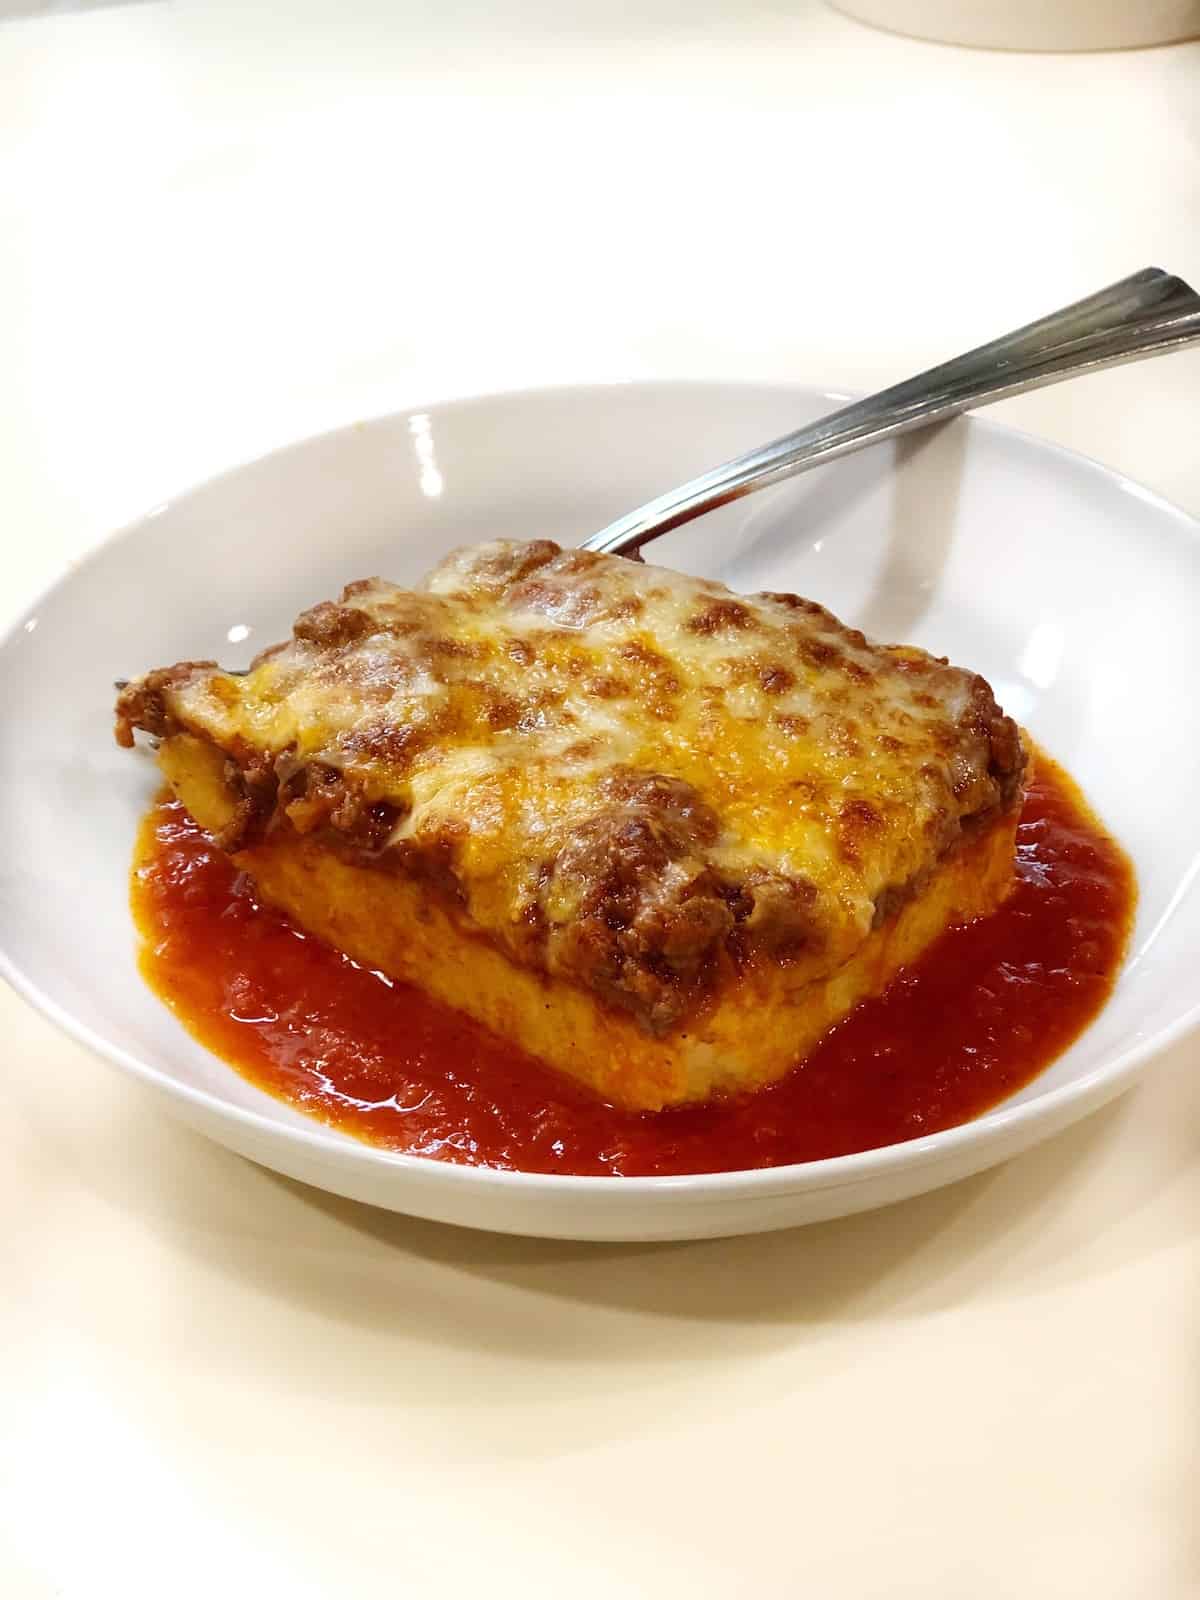 Italian baked polenta with meat sauce in a white bowl with a fork